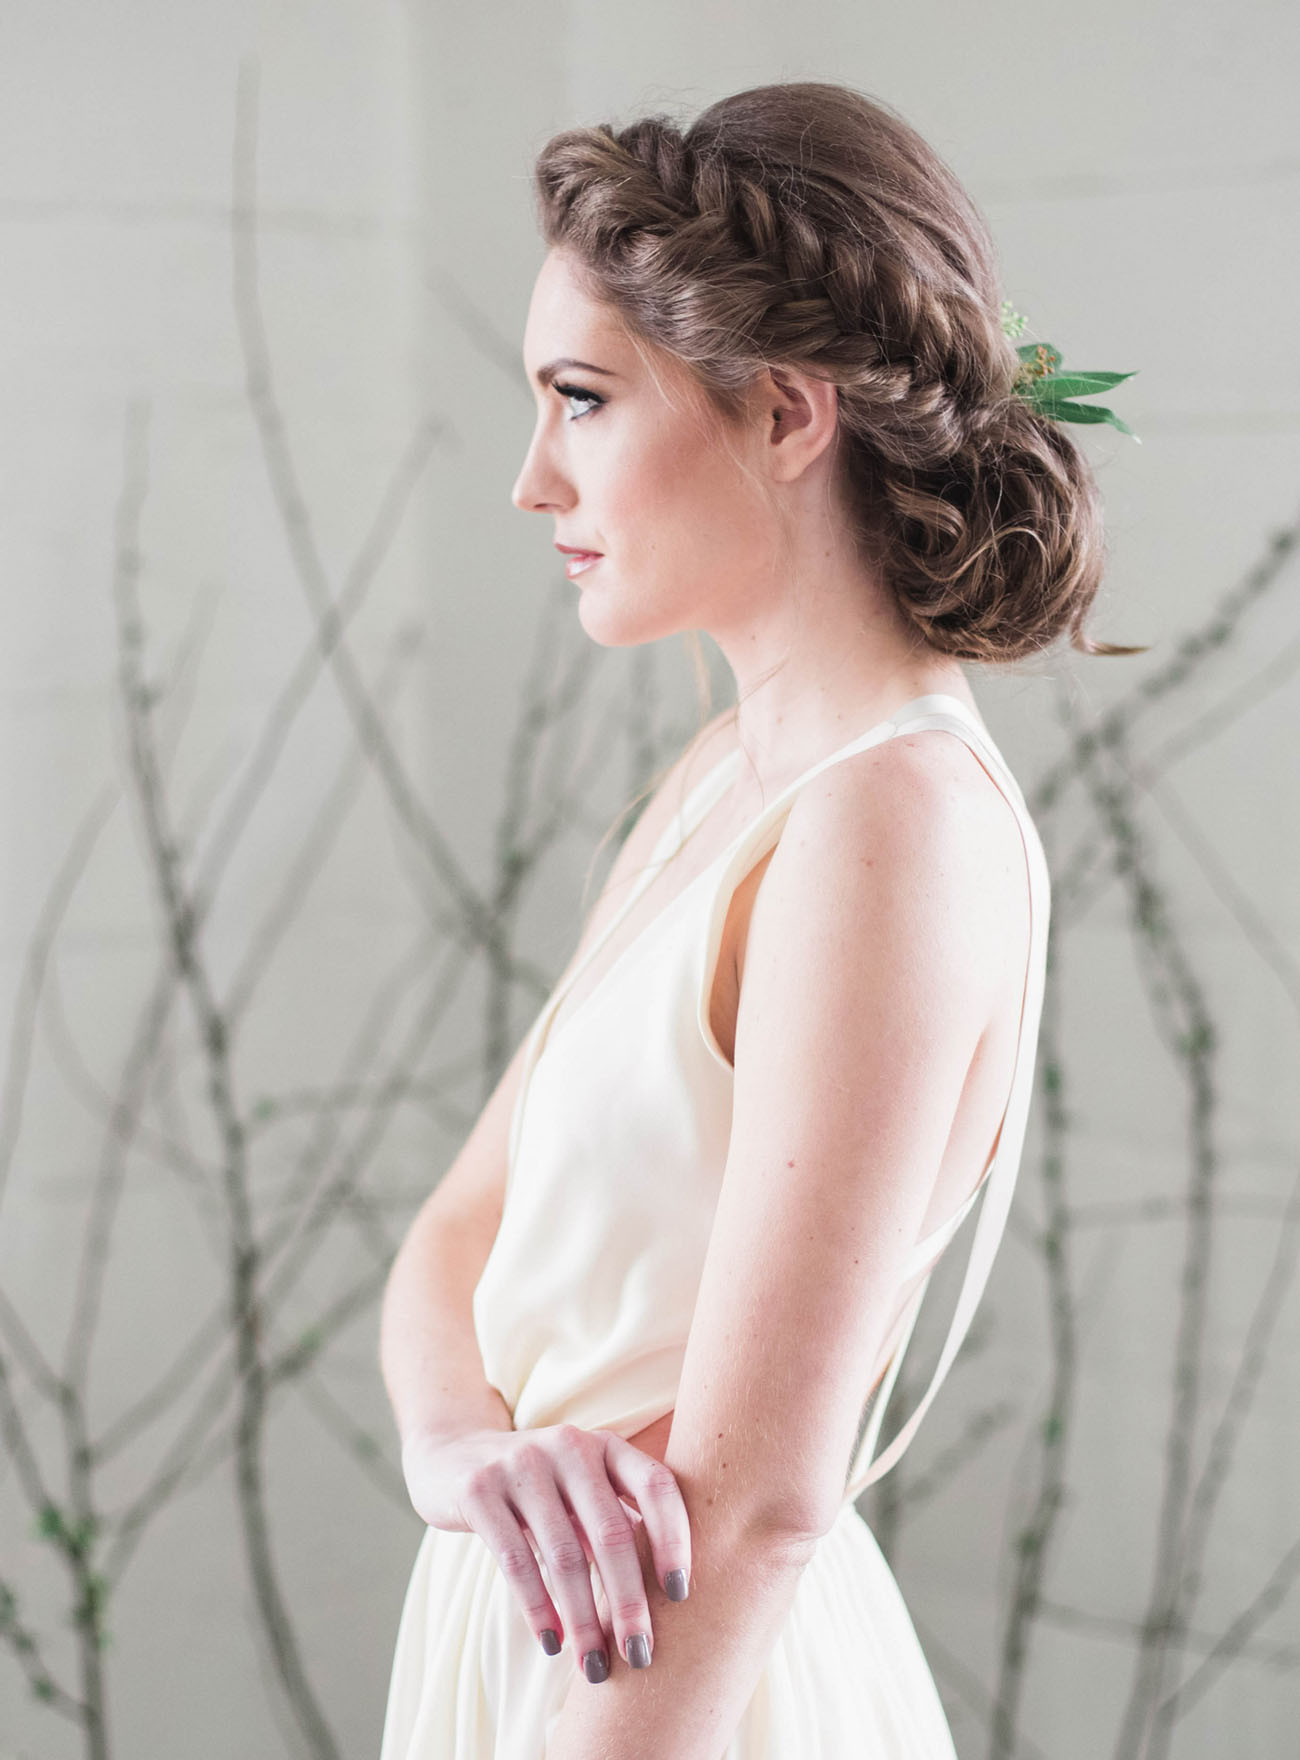 bride with braided hair that goes into a low bun and some greenery